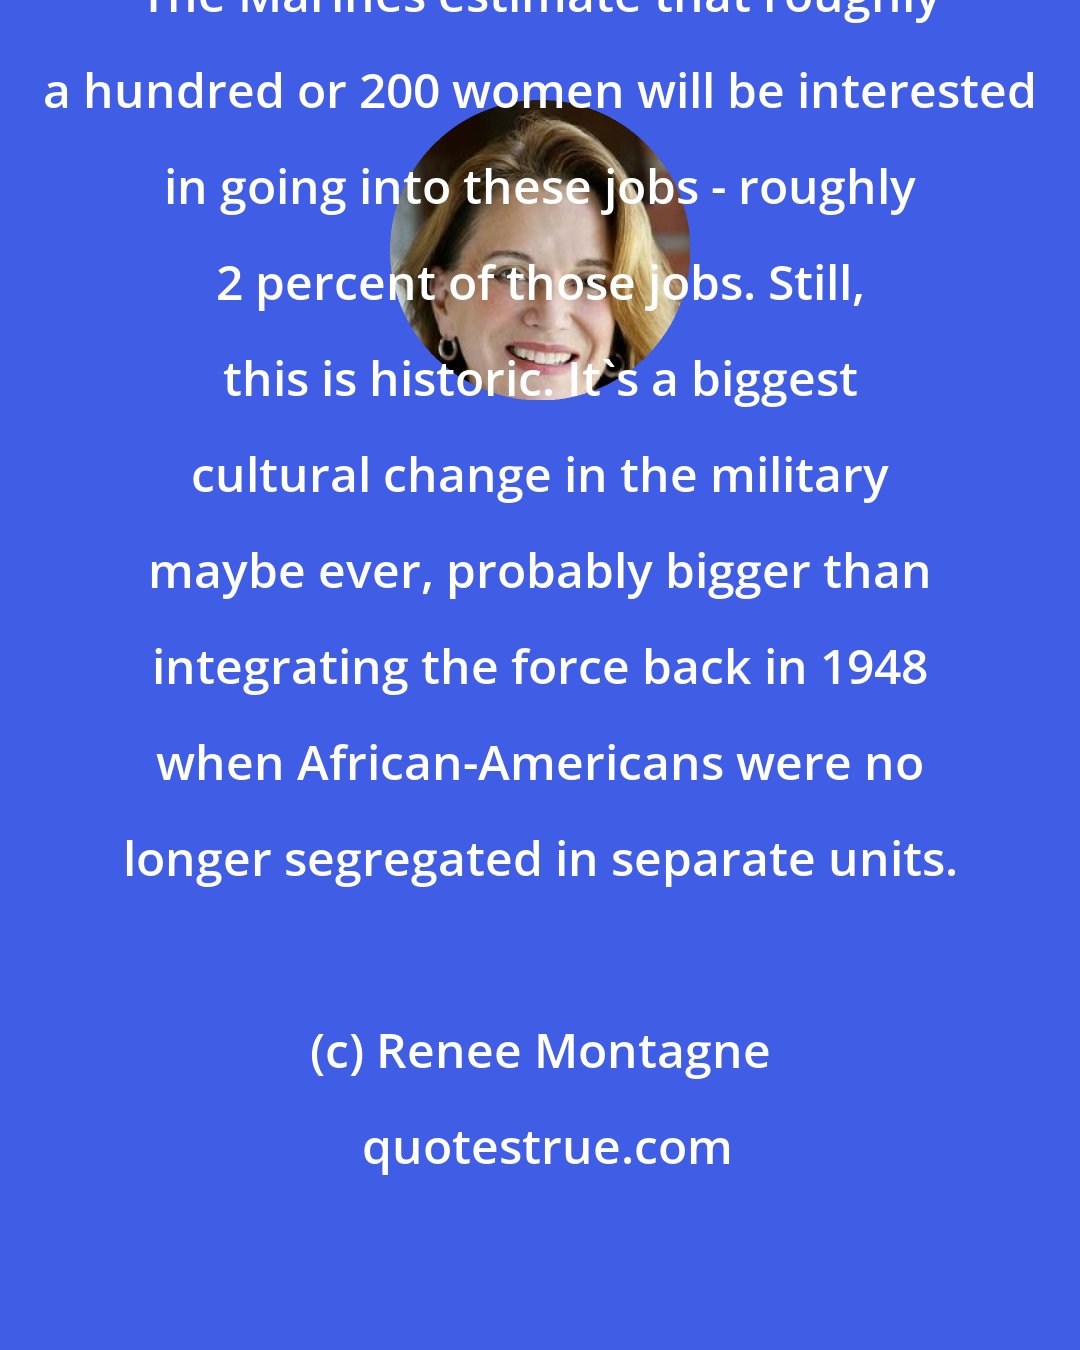 Renee Montagne: The Marines estimate that roughly a hundred or 200 women will be interested in going into these jobs - roughly 2 percent of those jobs. Still, this is historic. It's a biggest cultural change in the military maybe ever, probably bigger than integrating the force back in 1948 when African-Americans were no longer segregated in separate units.